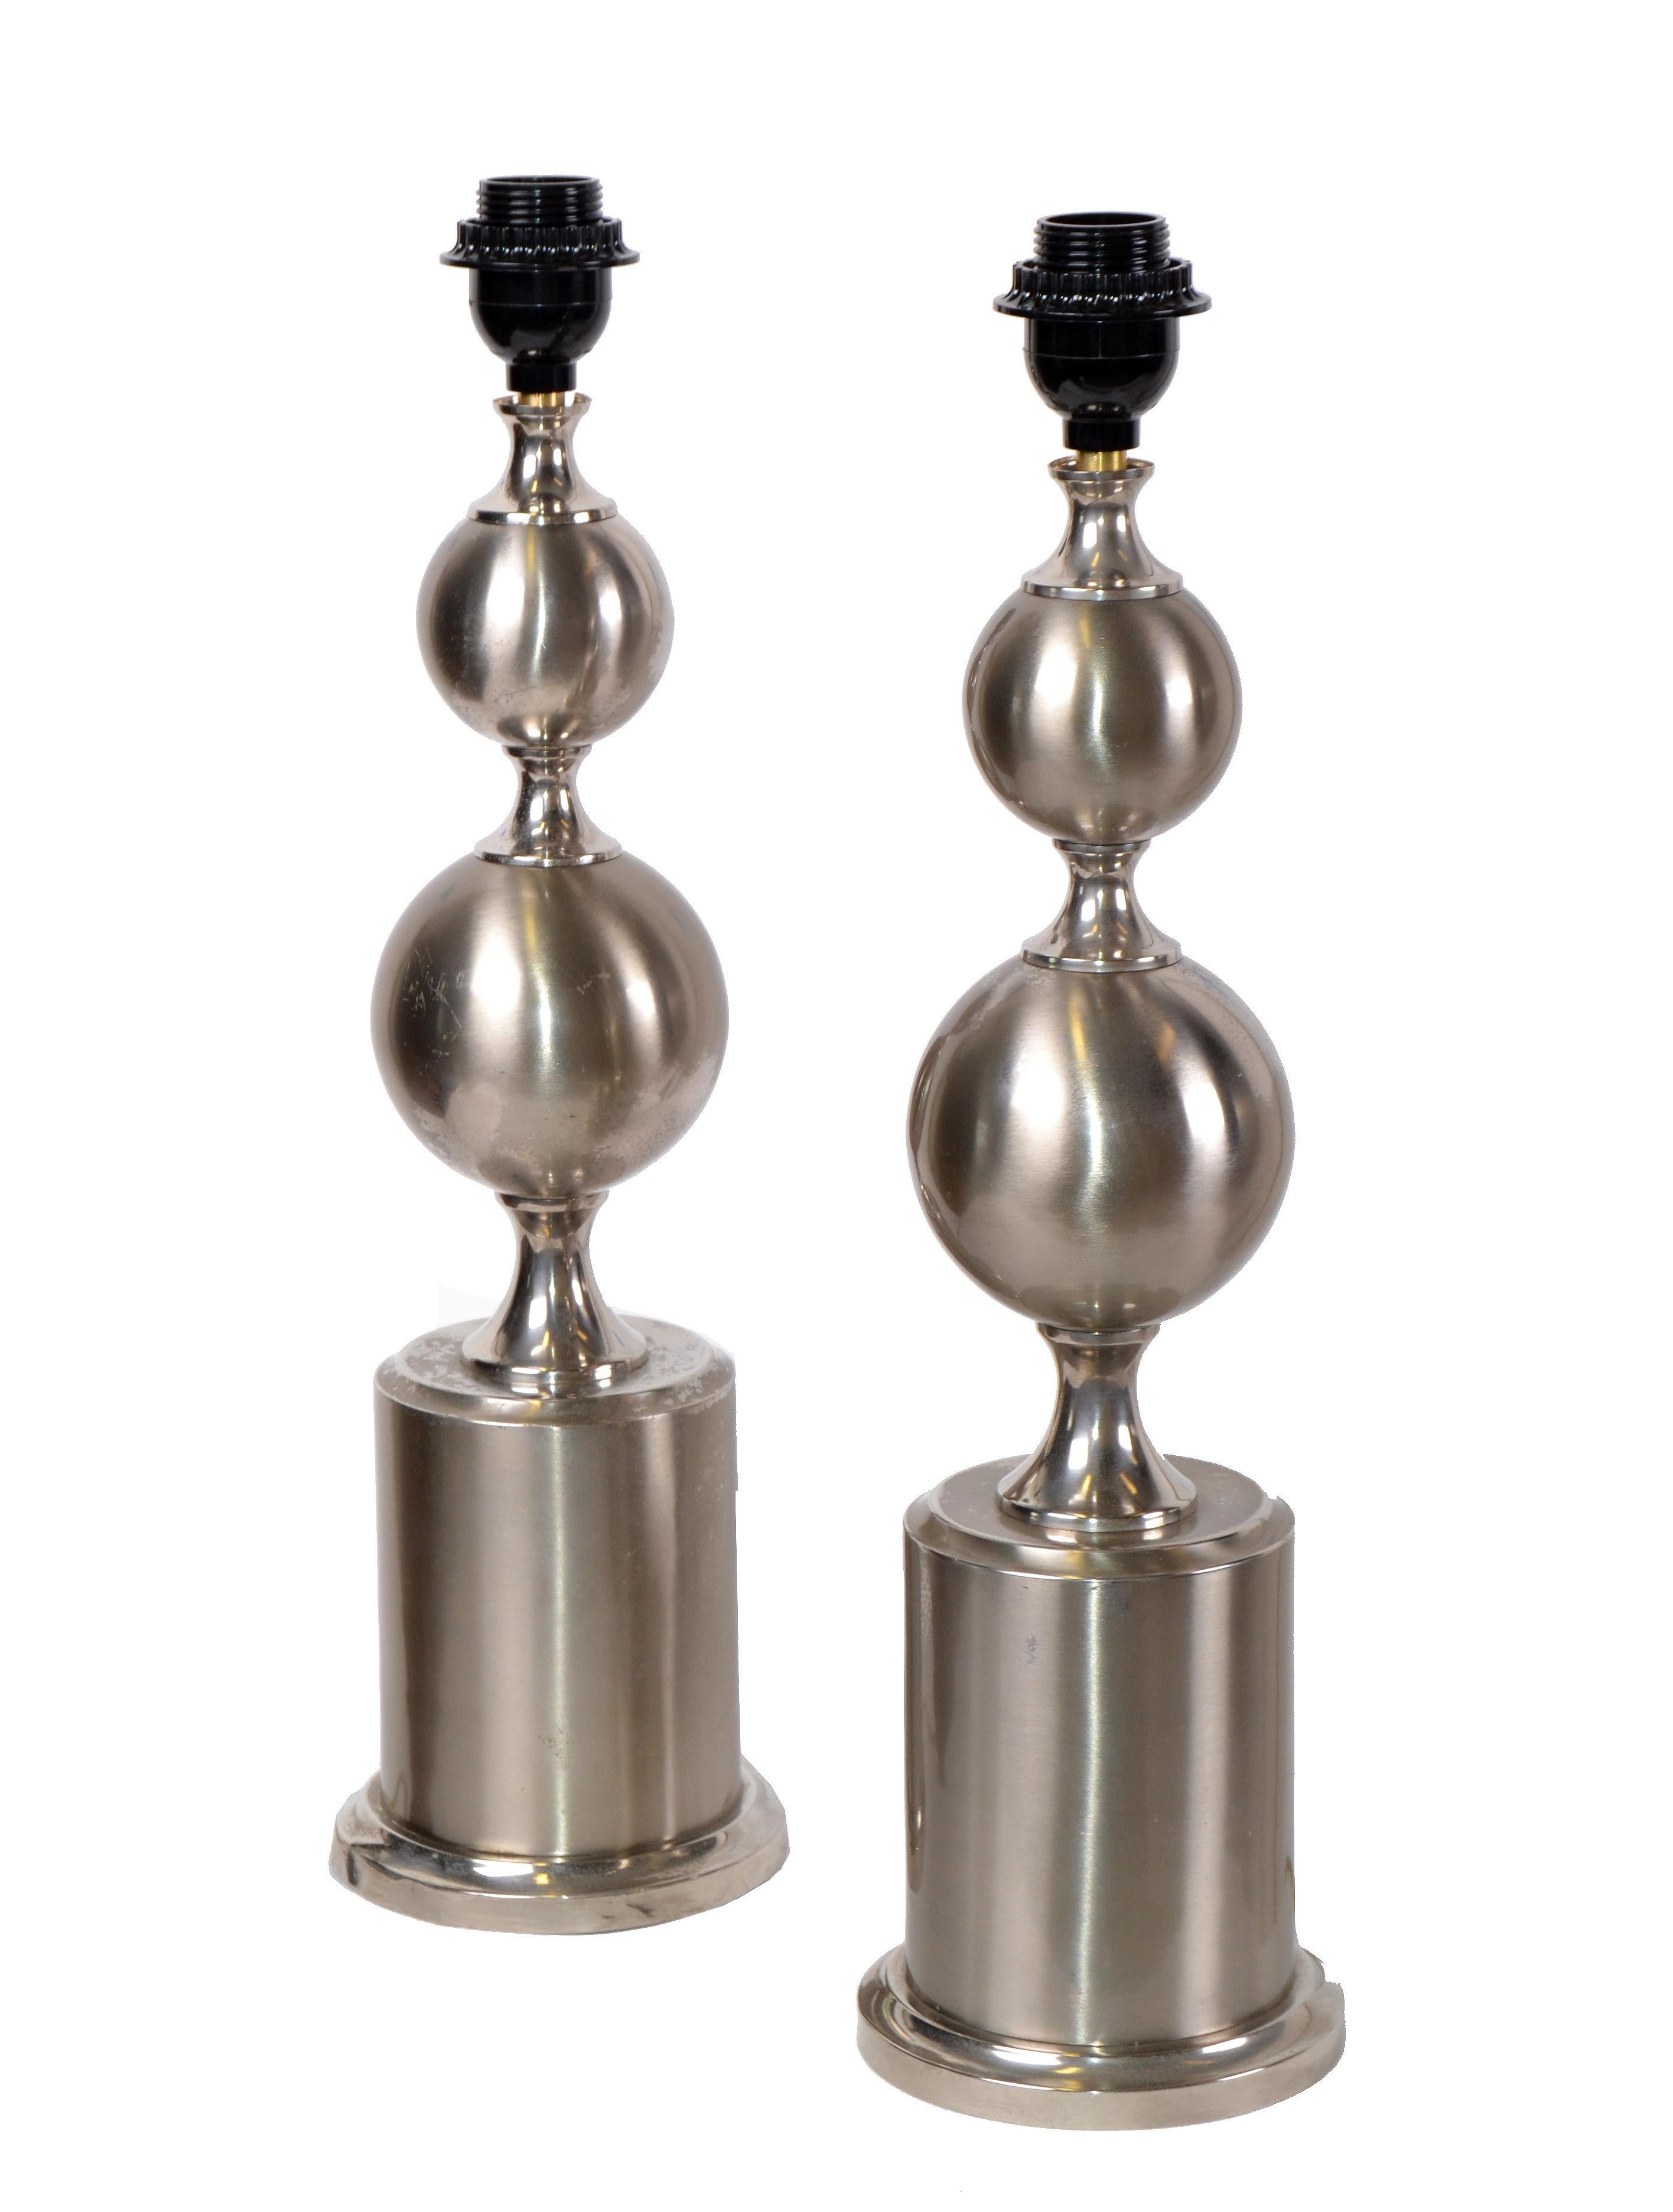 Pair of polished steel French Mid-Century Modern two spheres table lamps by Maison Barbier from the early 1970s.
US Rewiring and each lamp takes one light bulb max. 75 watts or LED bulbs.